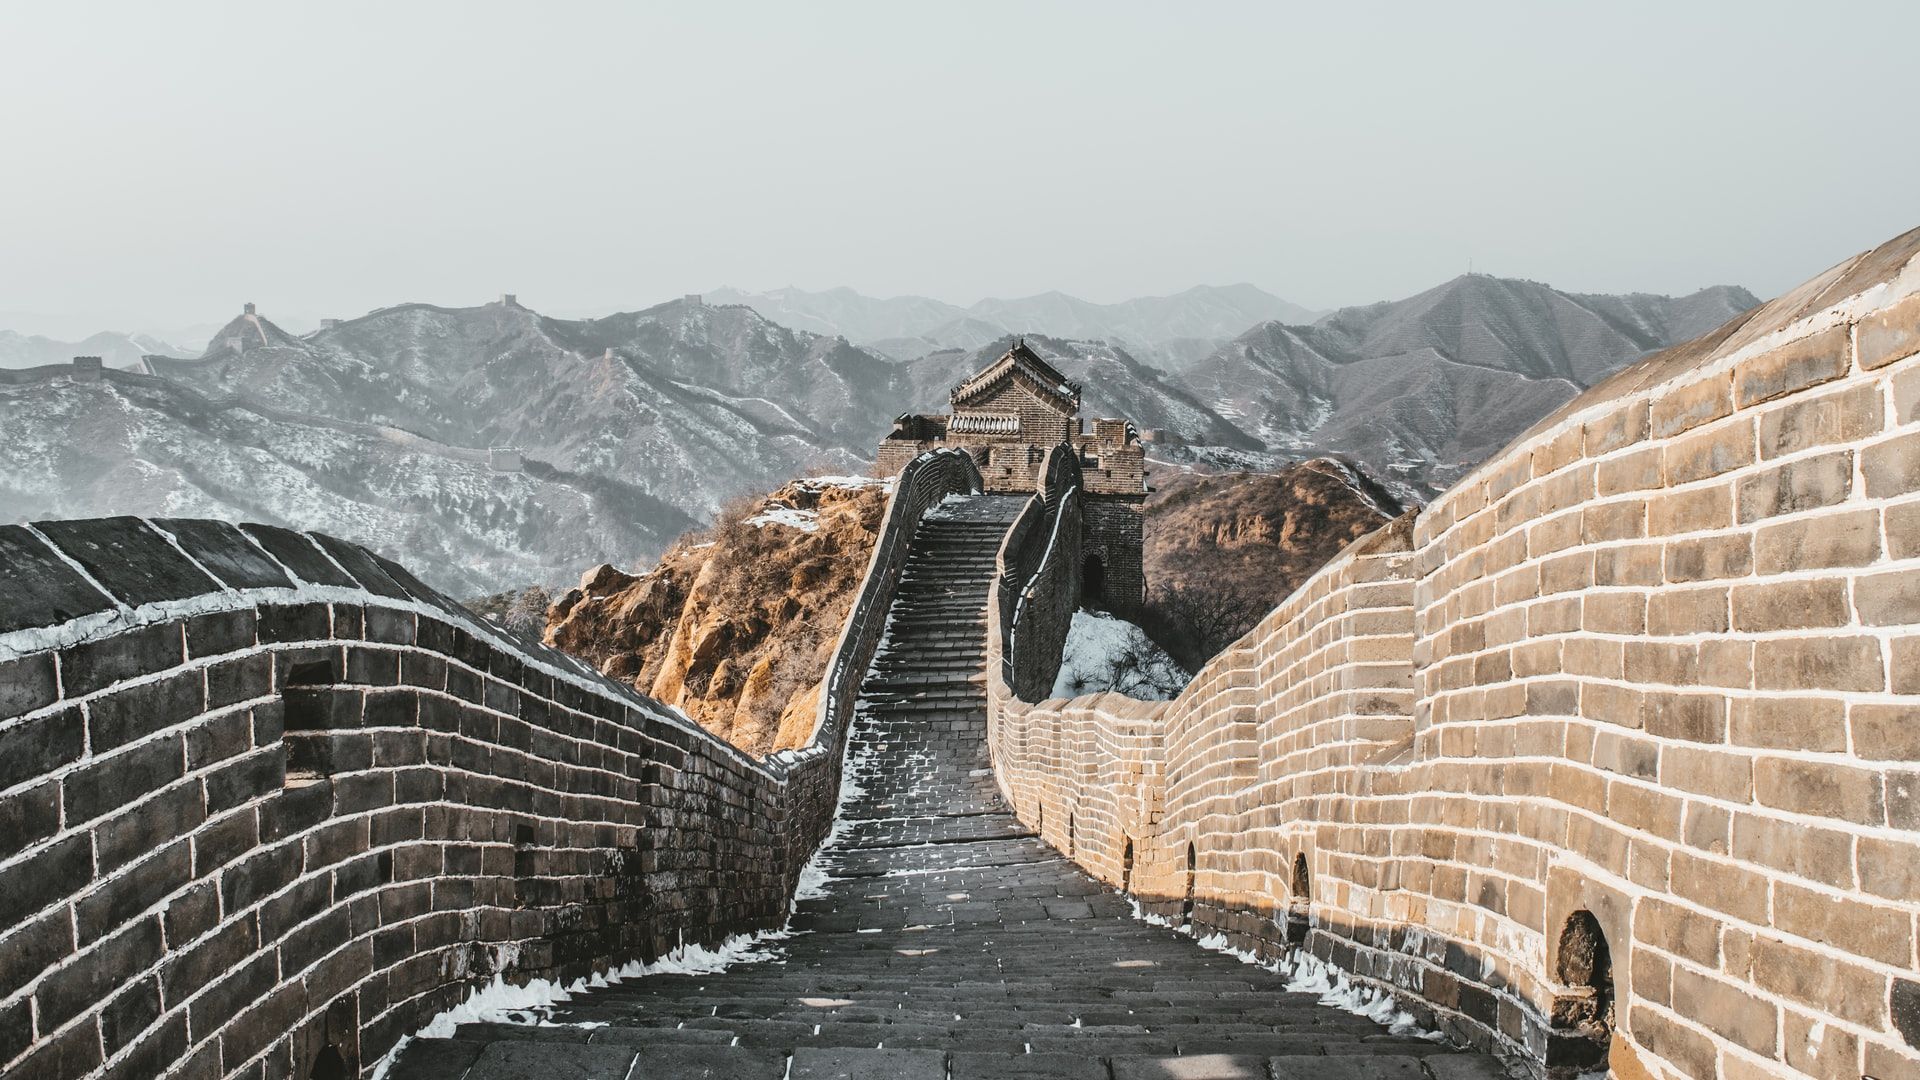 Partly Collapsed Due to Earthquake, This is the History of the Great Wall of China